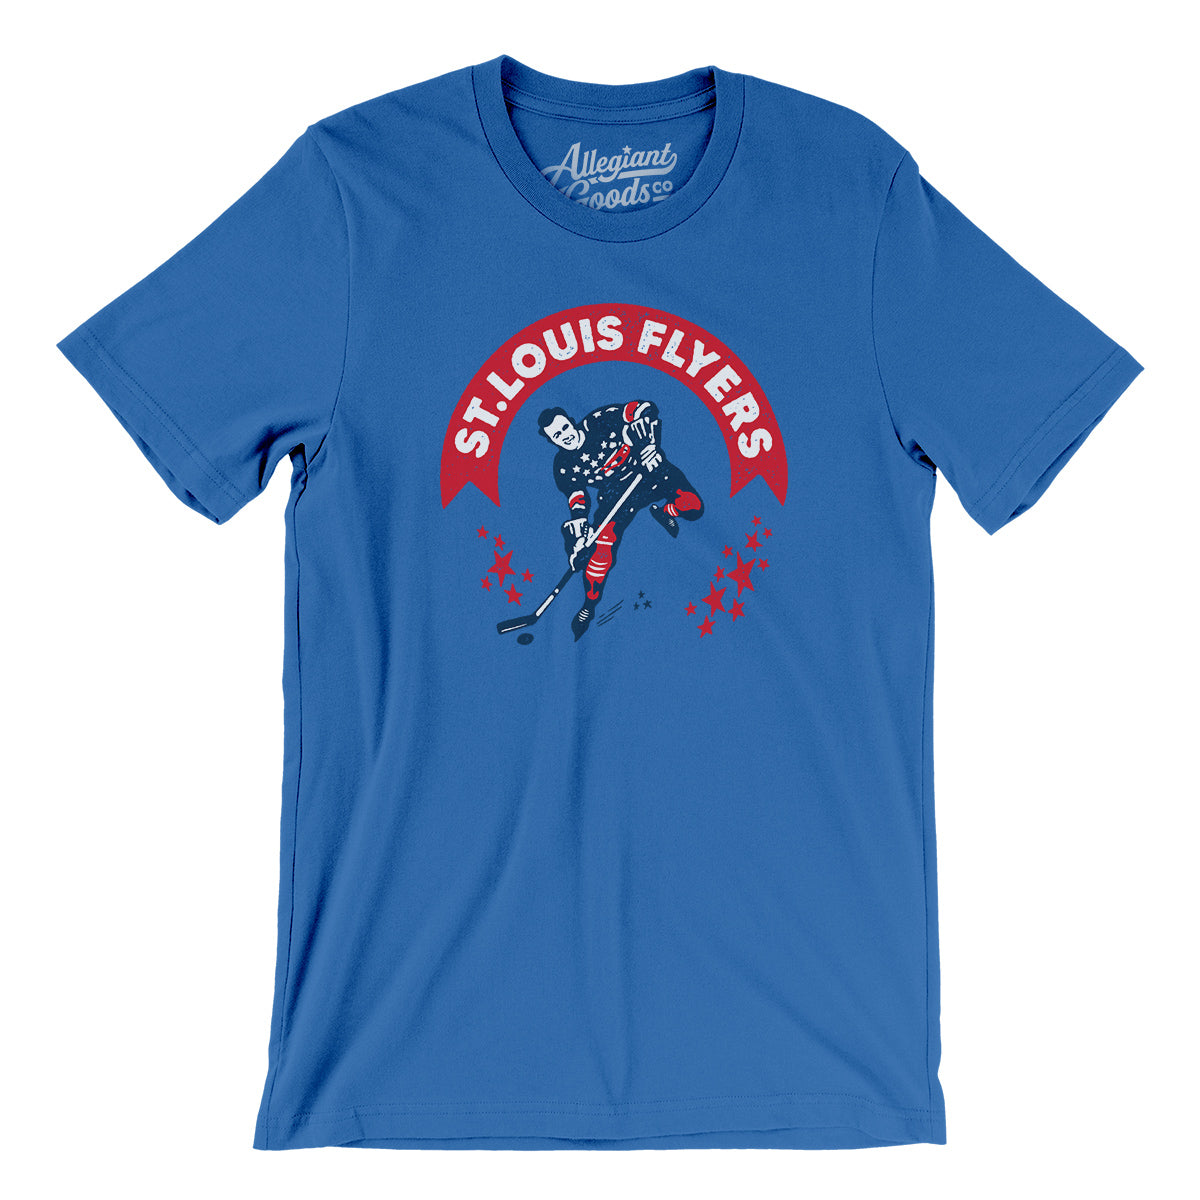 St Louis Blues Fan - Hockey Essential T-Shirt for Sale by MoonsmileProd